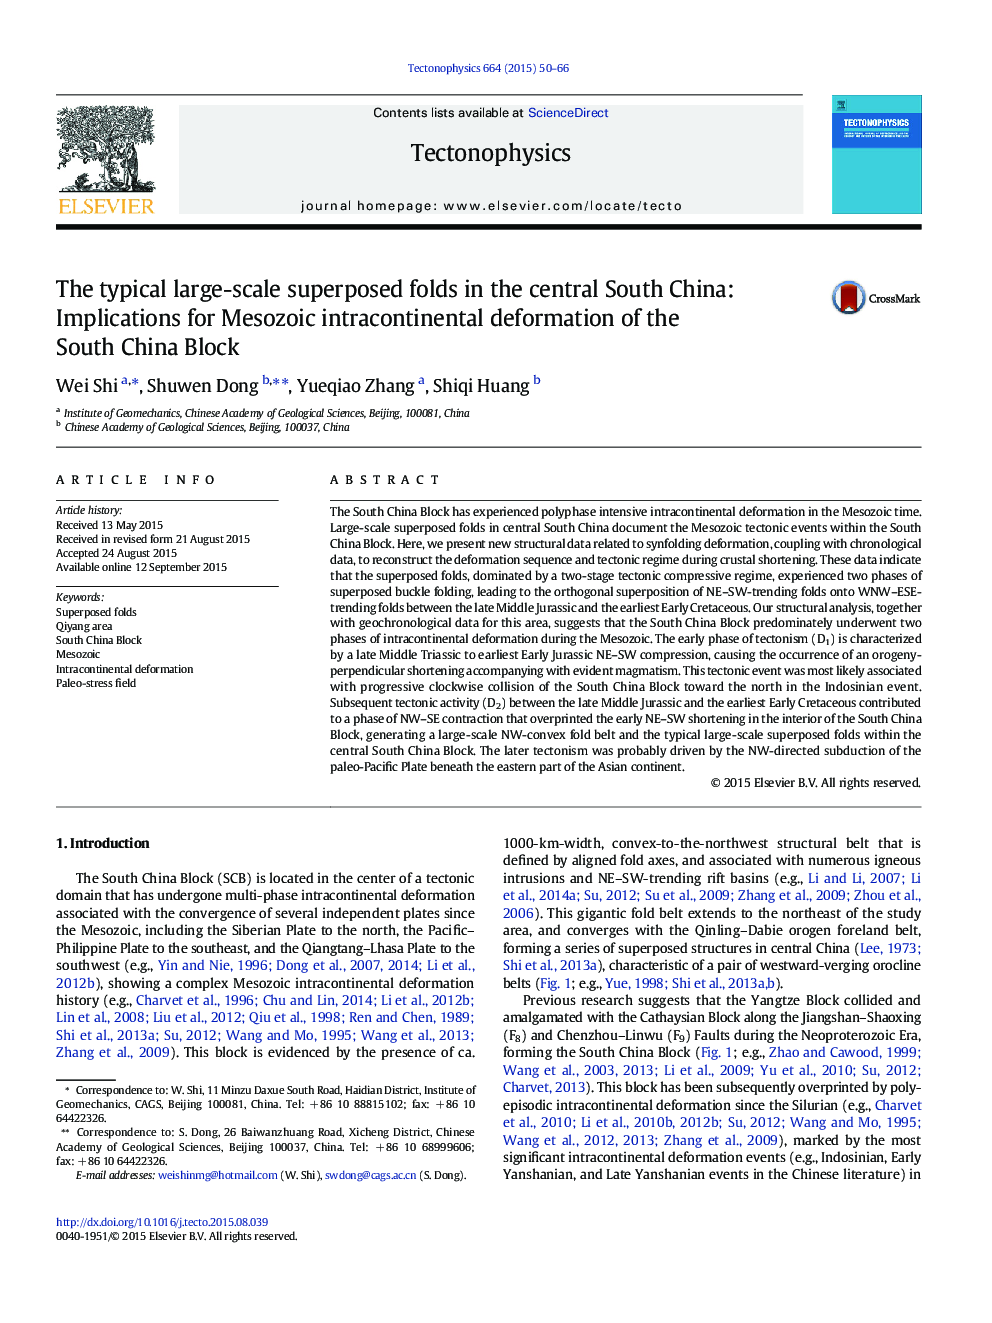 The typical large-scale superposed folds in the central South China: Implications for Mesozoic intracontinental deformation of the South China Block